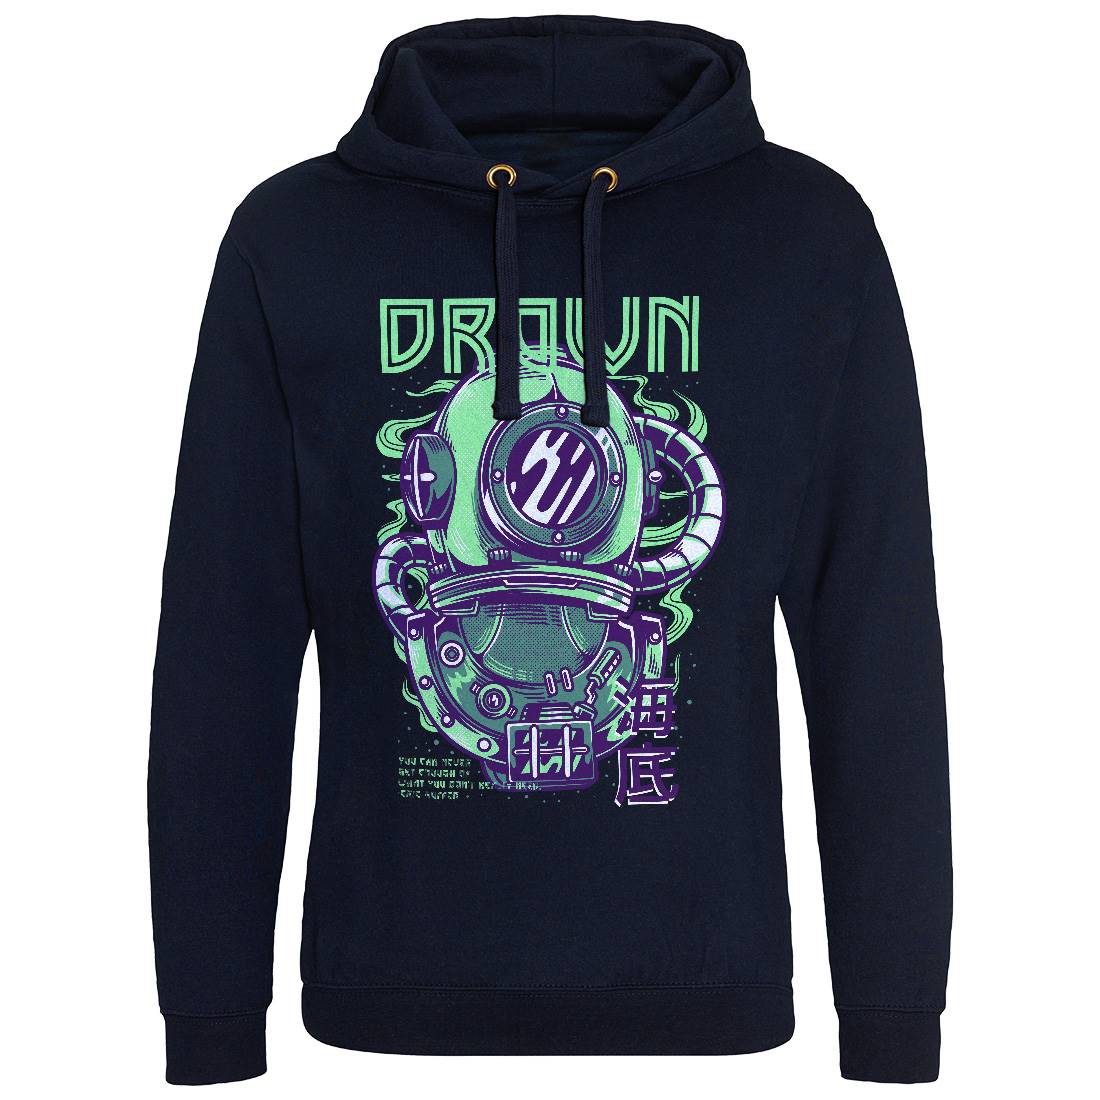 Drown Mens Hoodie Without Pocket Navy D762